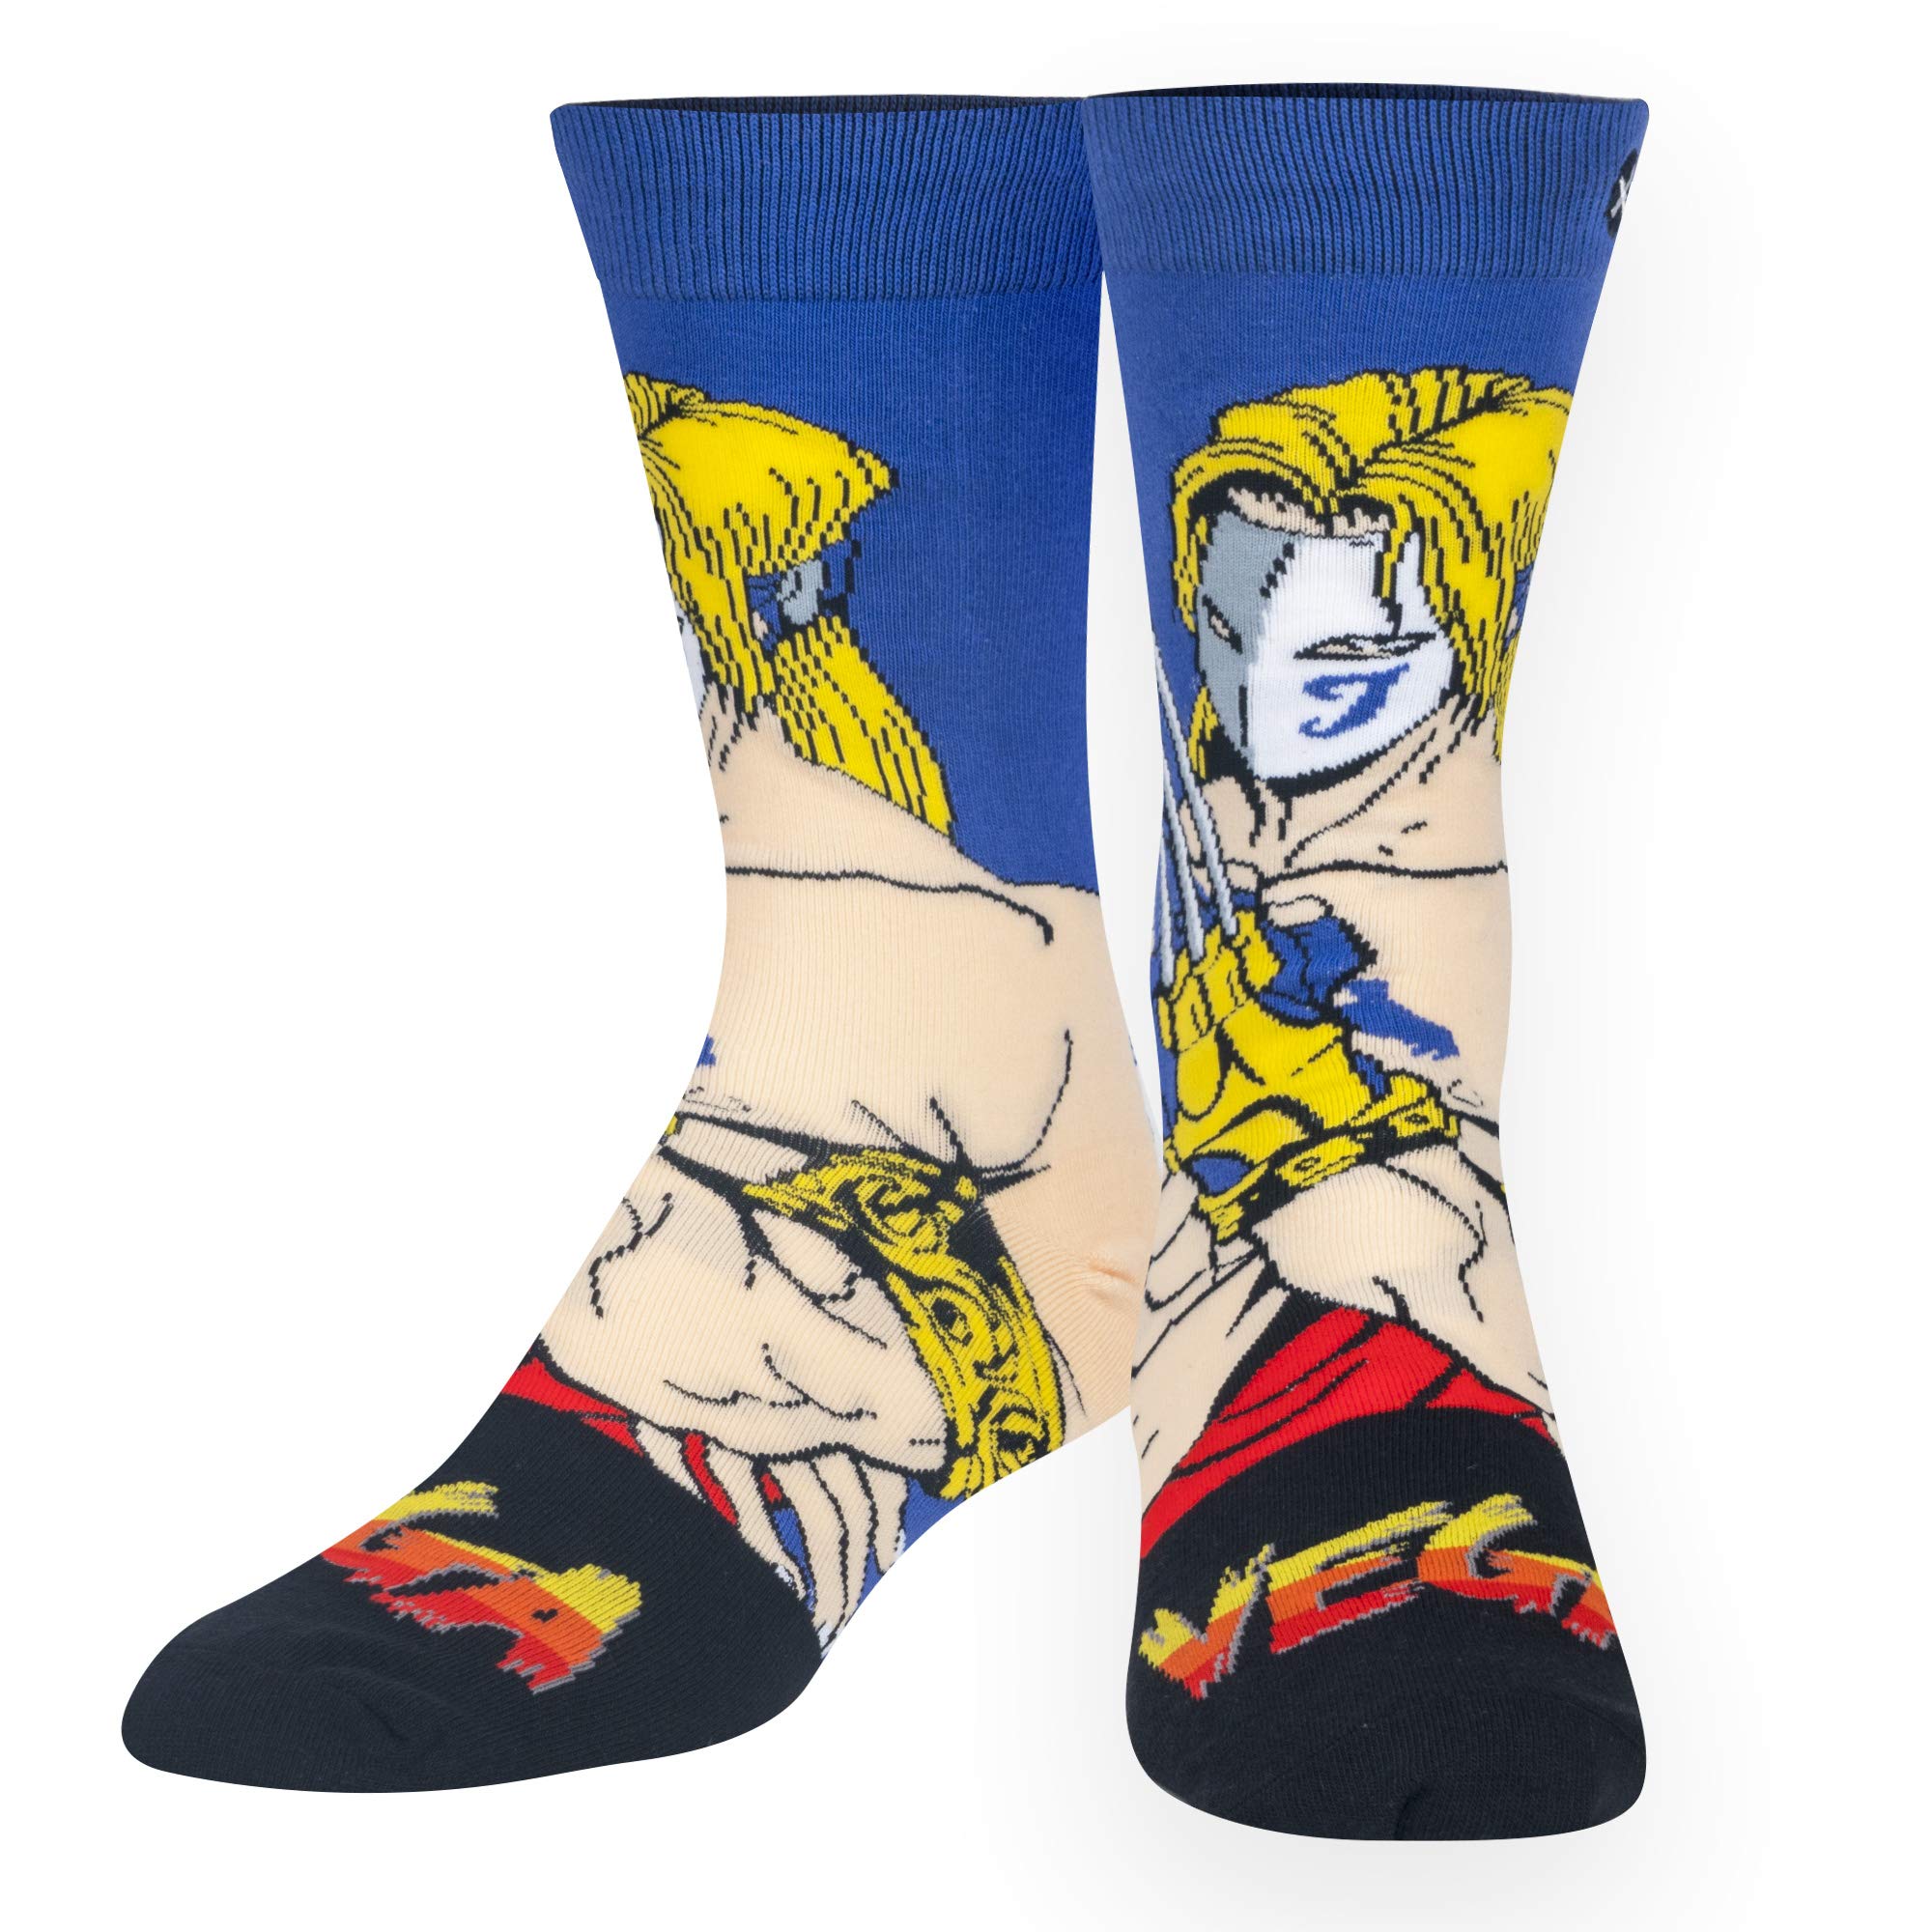 Odd Sox, Video Games, Street Fighter 2 Characters, Crew - Vega